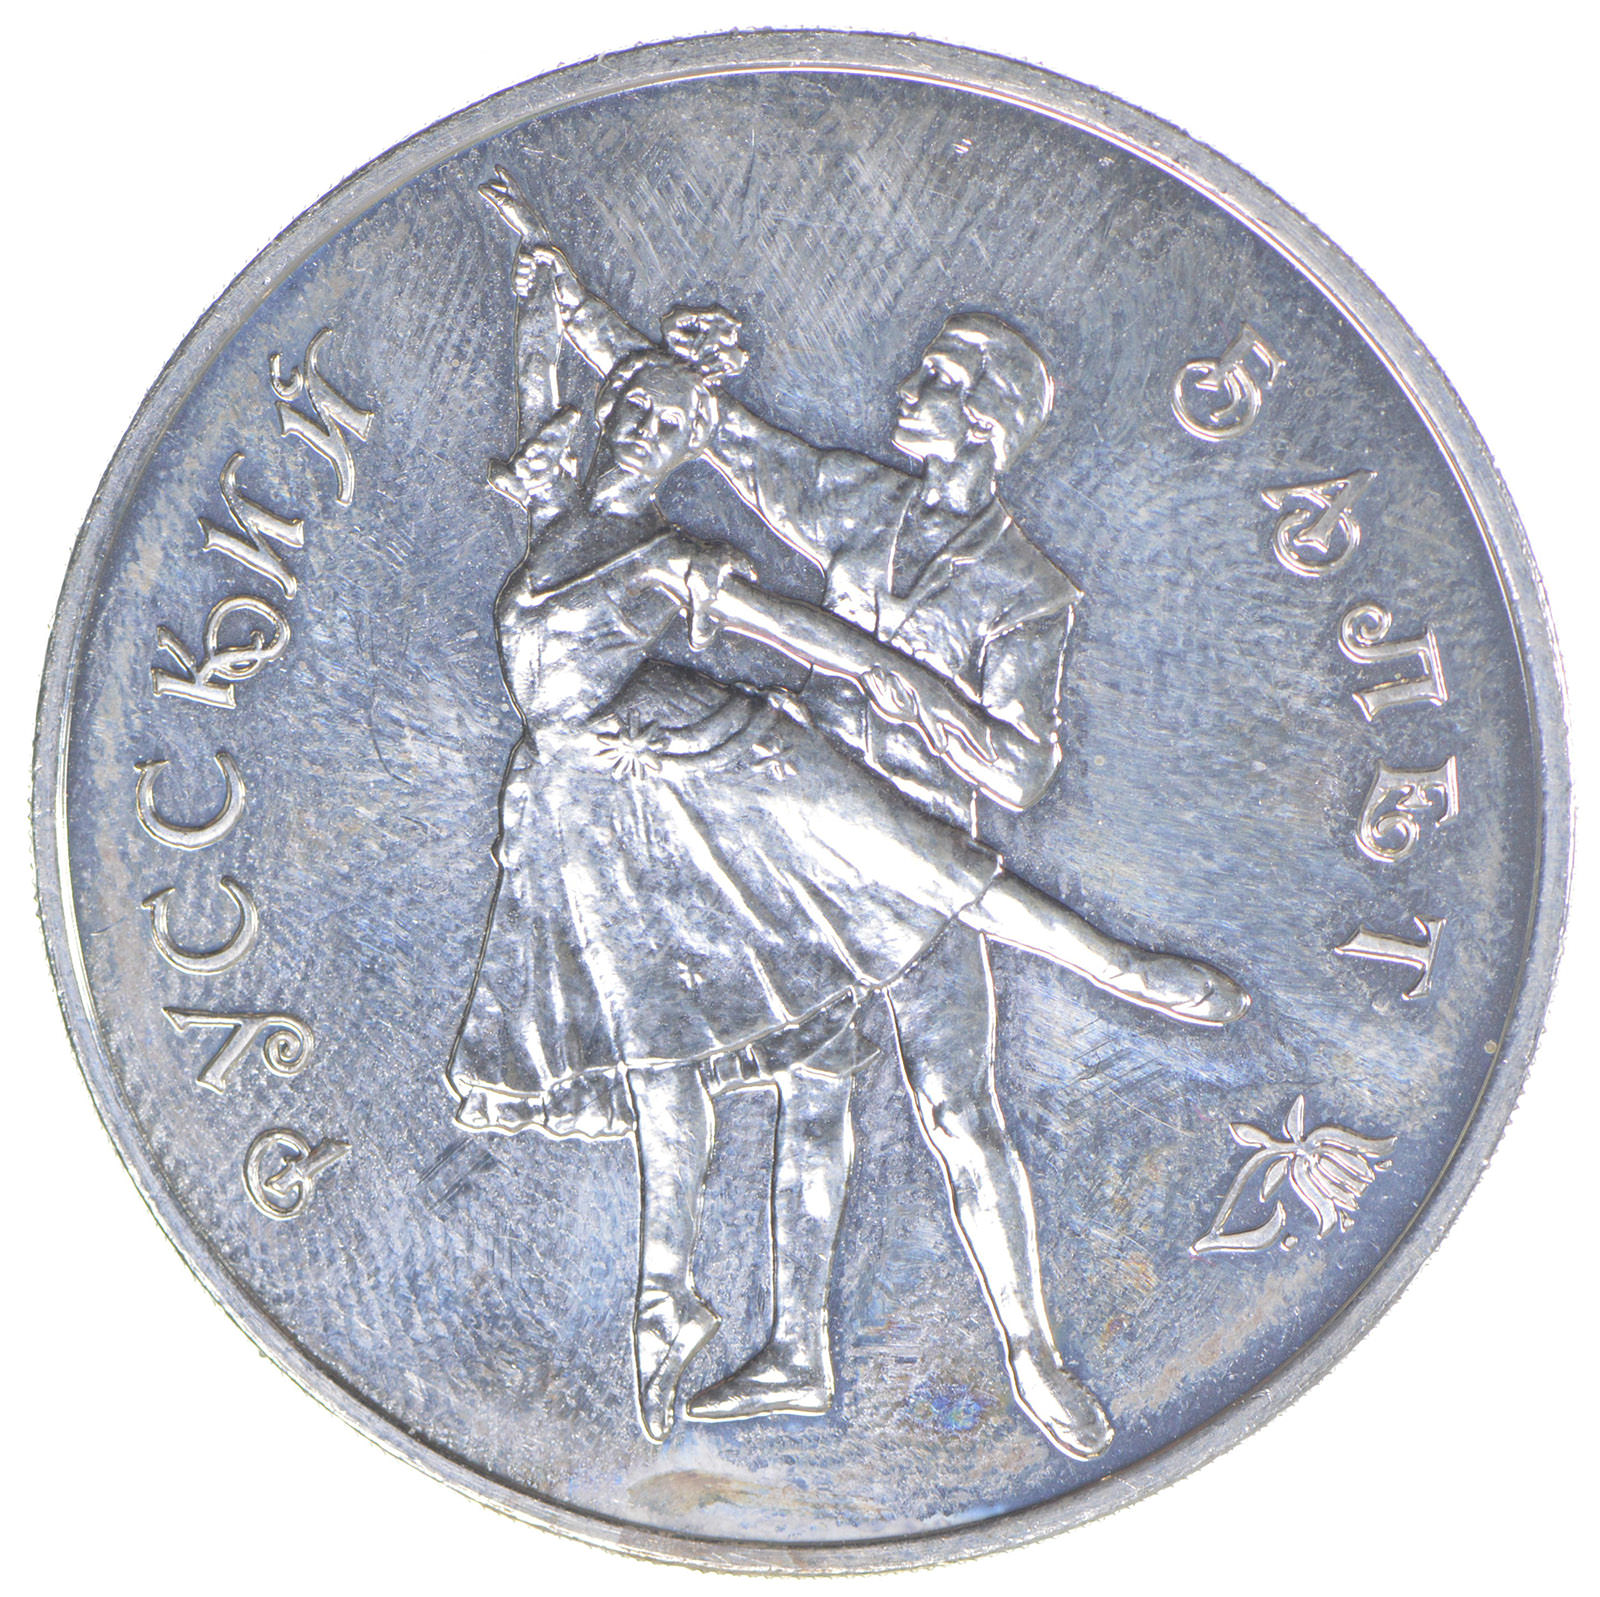 Russia 1993 3 Roubles Ballerina Coin - 1 Troy Oz. .999 Silver ...